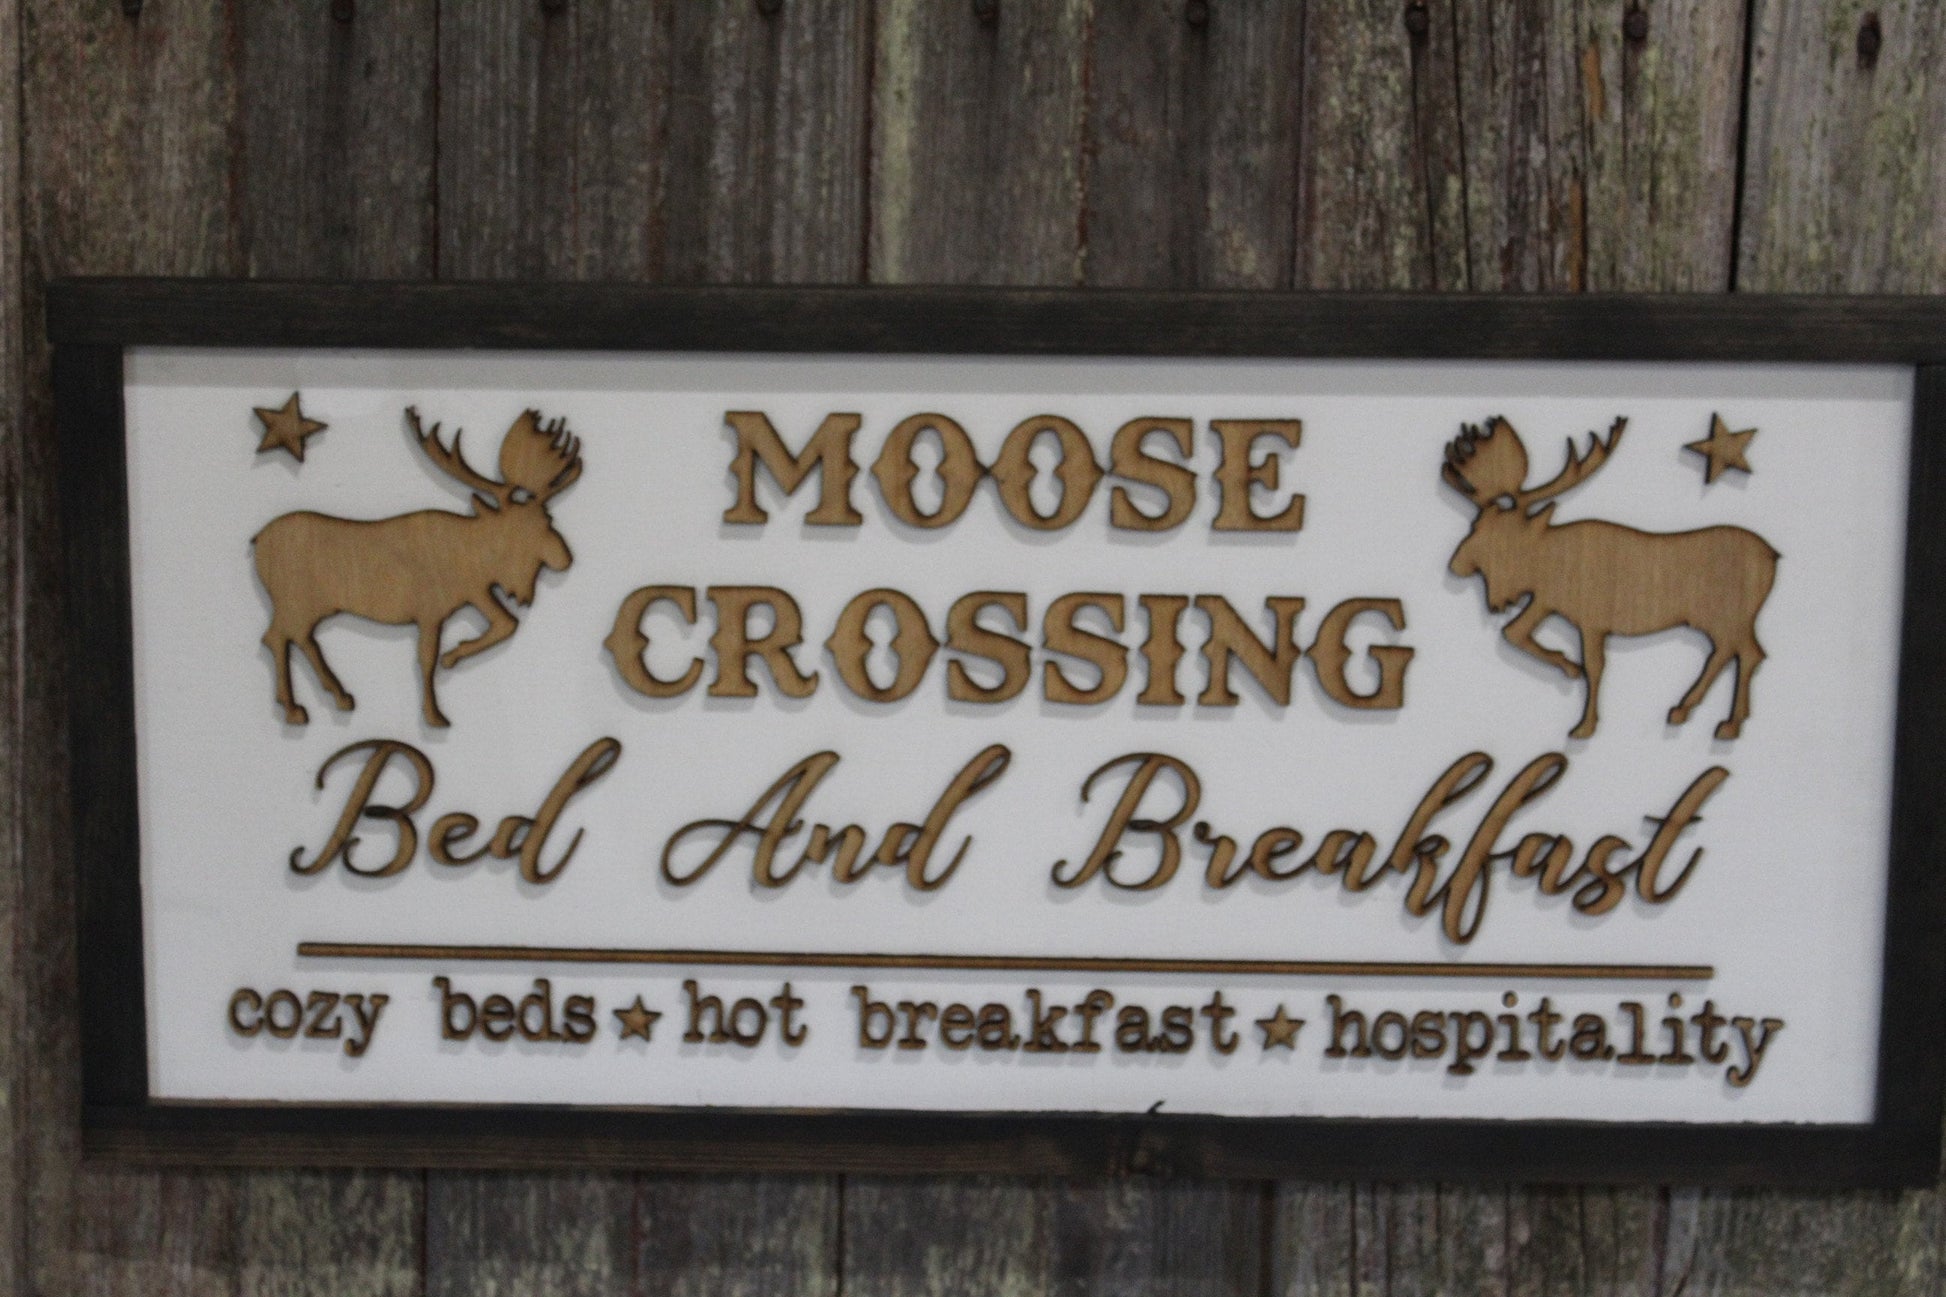 Moose Crossing Cabin Sign Rustic Bed And Breakfast BNB Primitive Rustic Decor Country 3D Raised Text Cozy Beds Hospitality Lodge Wall Art